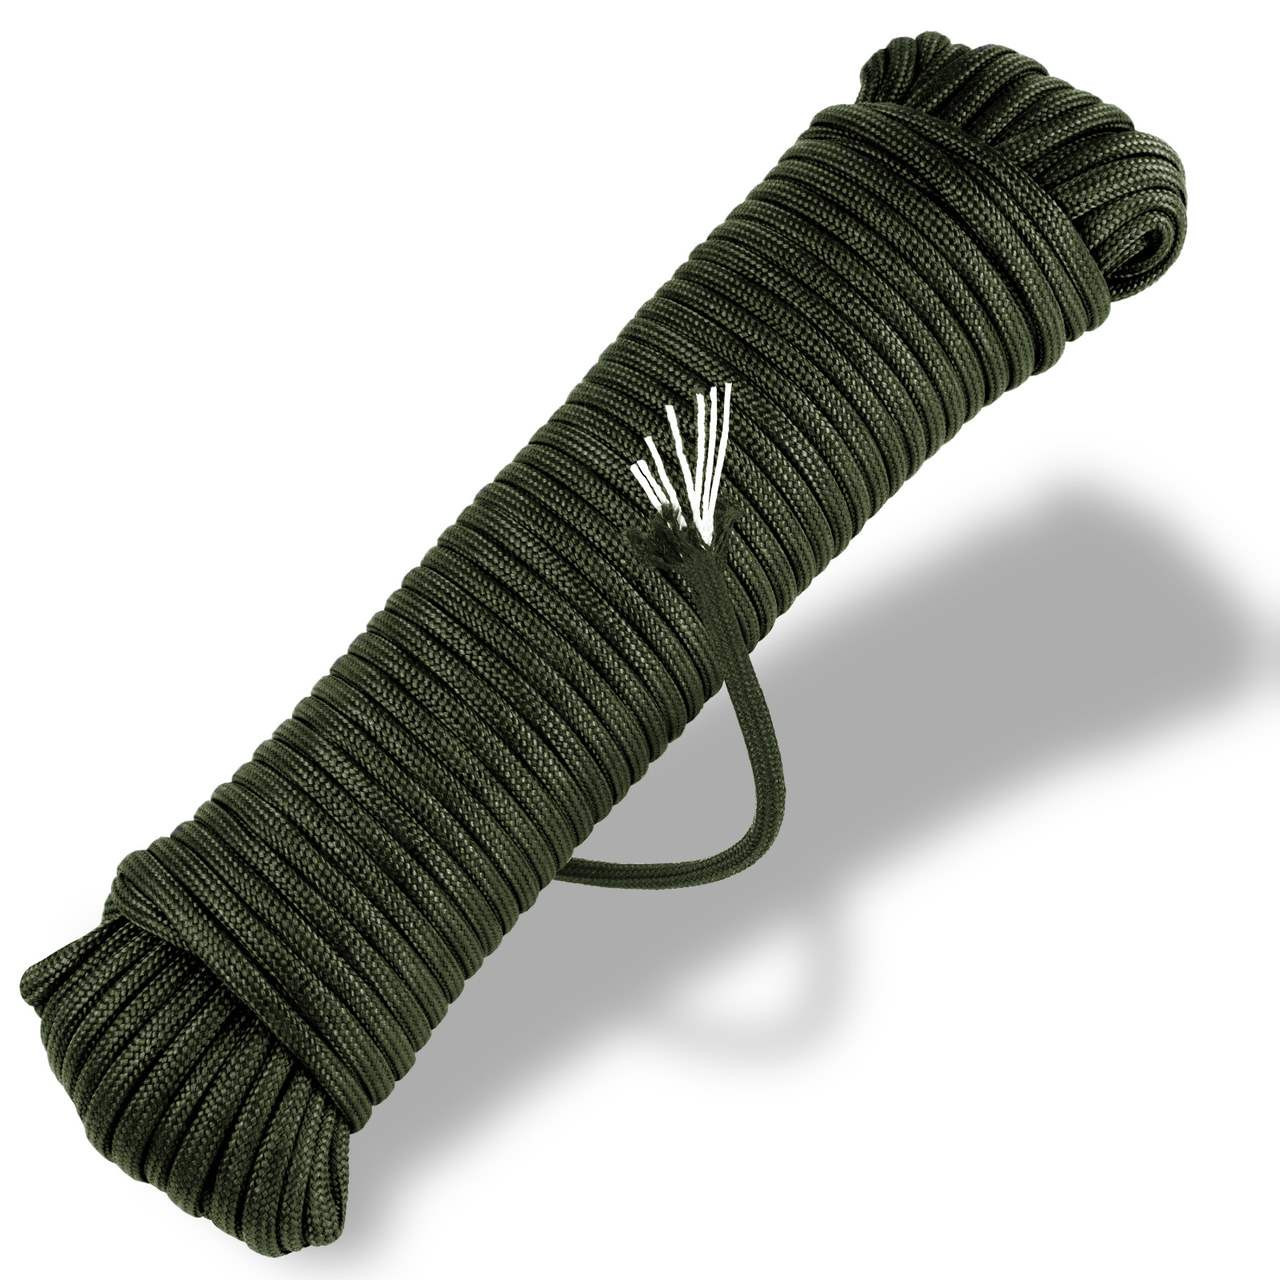 USA Made Paracord 550 - Olive Drab